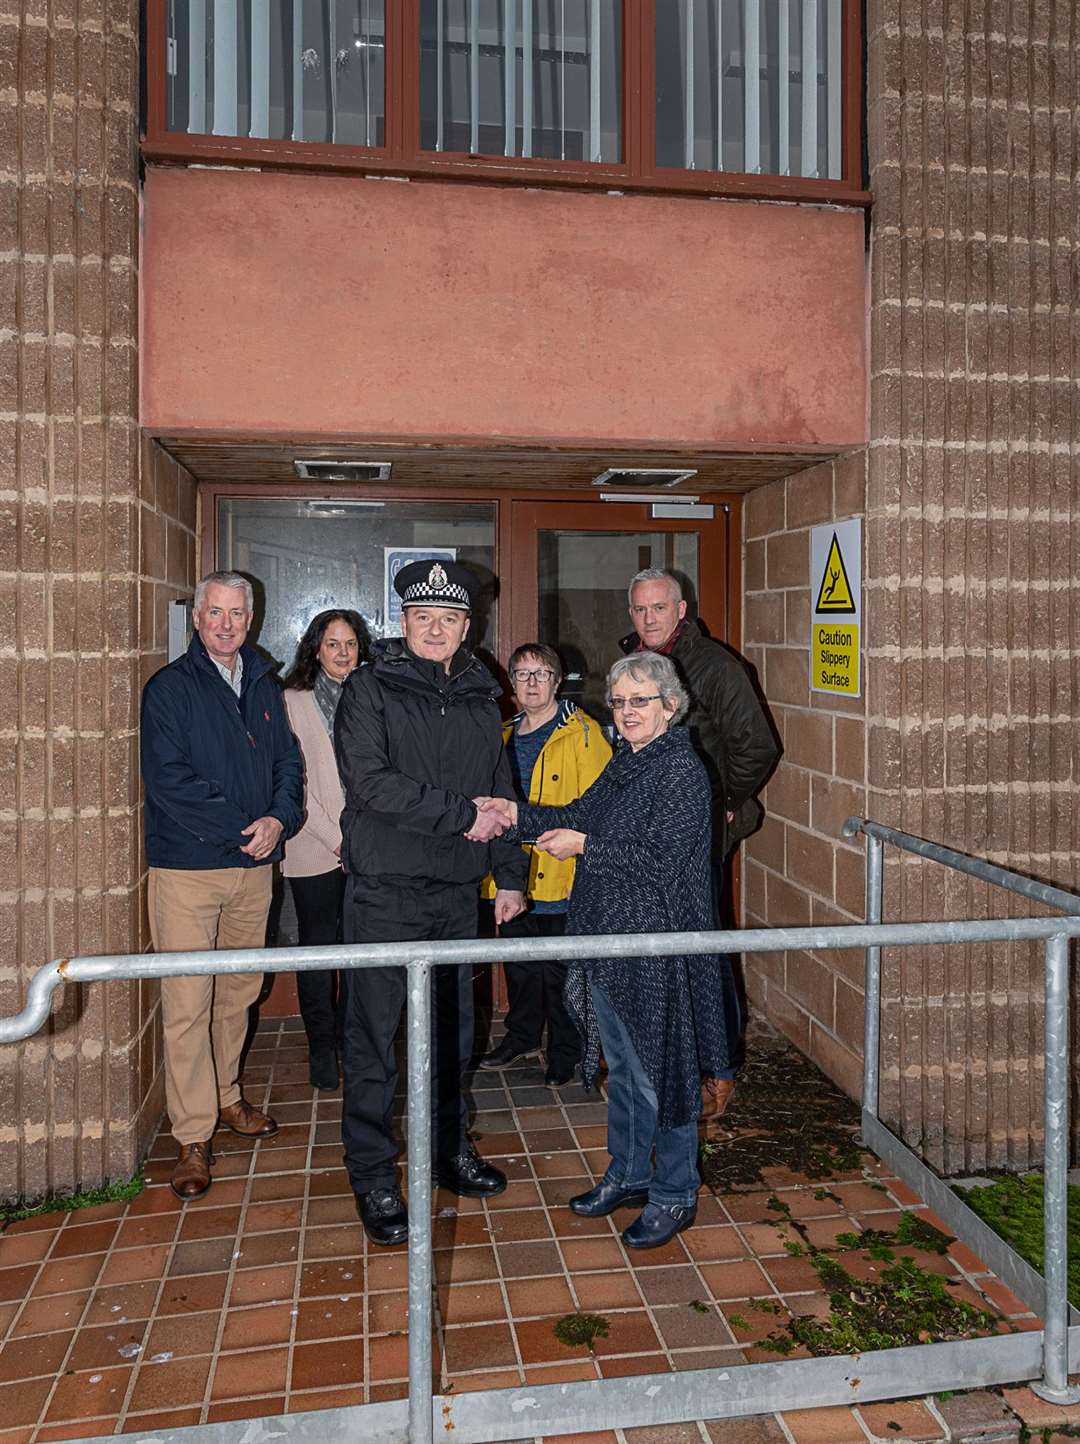 At the handover, from left: Gordon Sutherland, secretary DACIC; Catherine Moodie, community development manager DACIC; Chief Inspector Jamie Wilson, area commander Police Scotland; Liz Howard, Scottish Land Fund and HIE; Joan Bishop, chairman DACIC; Iain Levens, project architect. Picture: Andy Kirby.